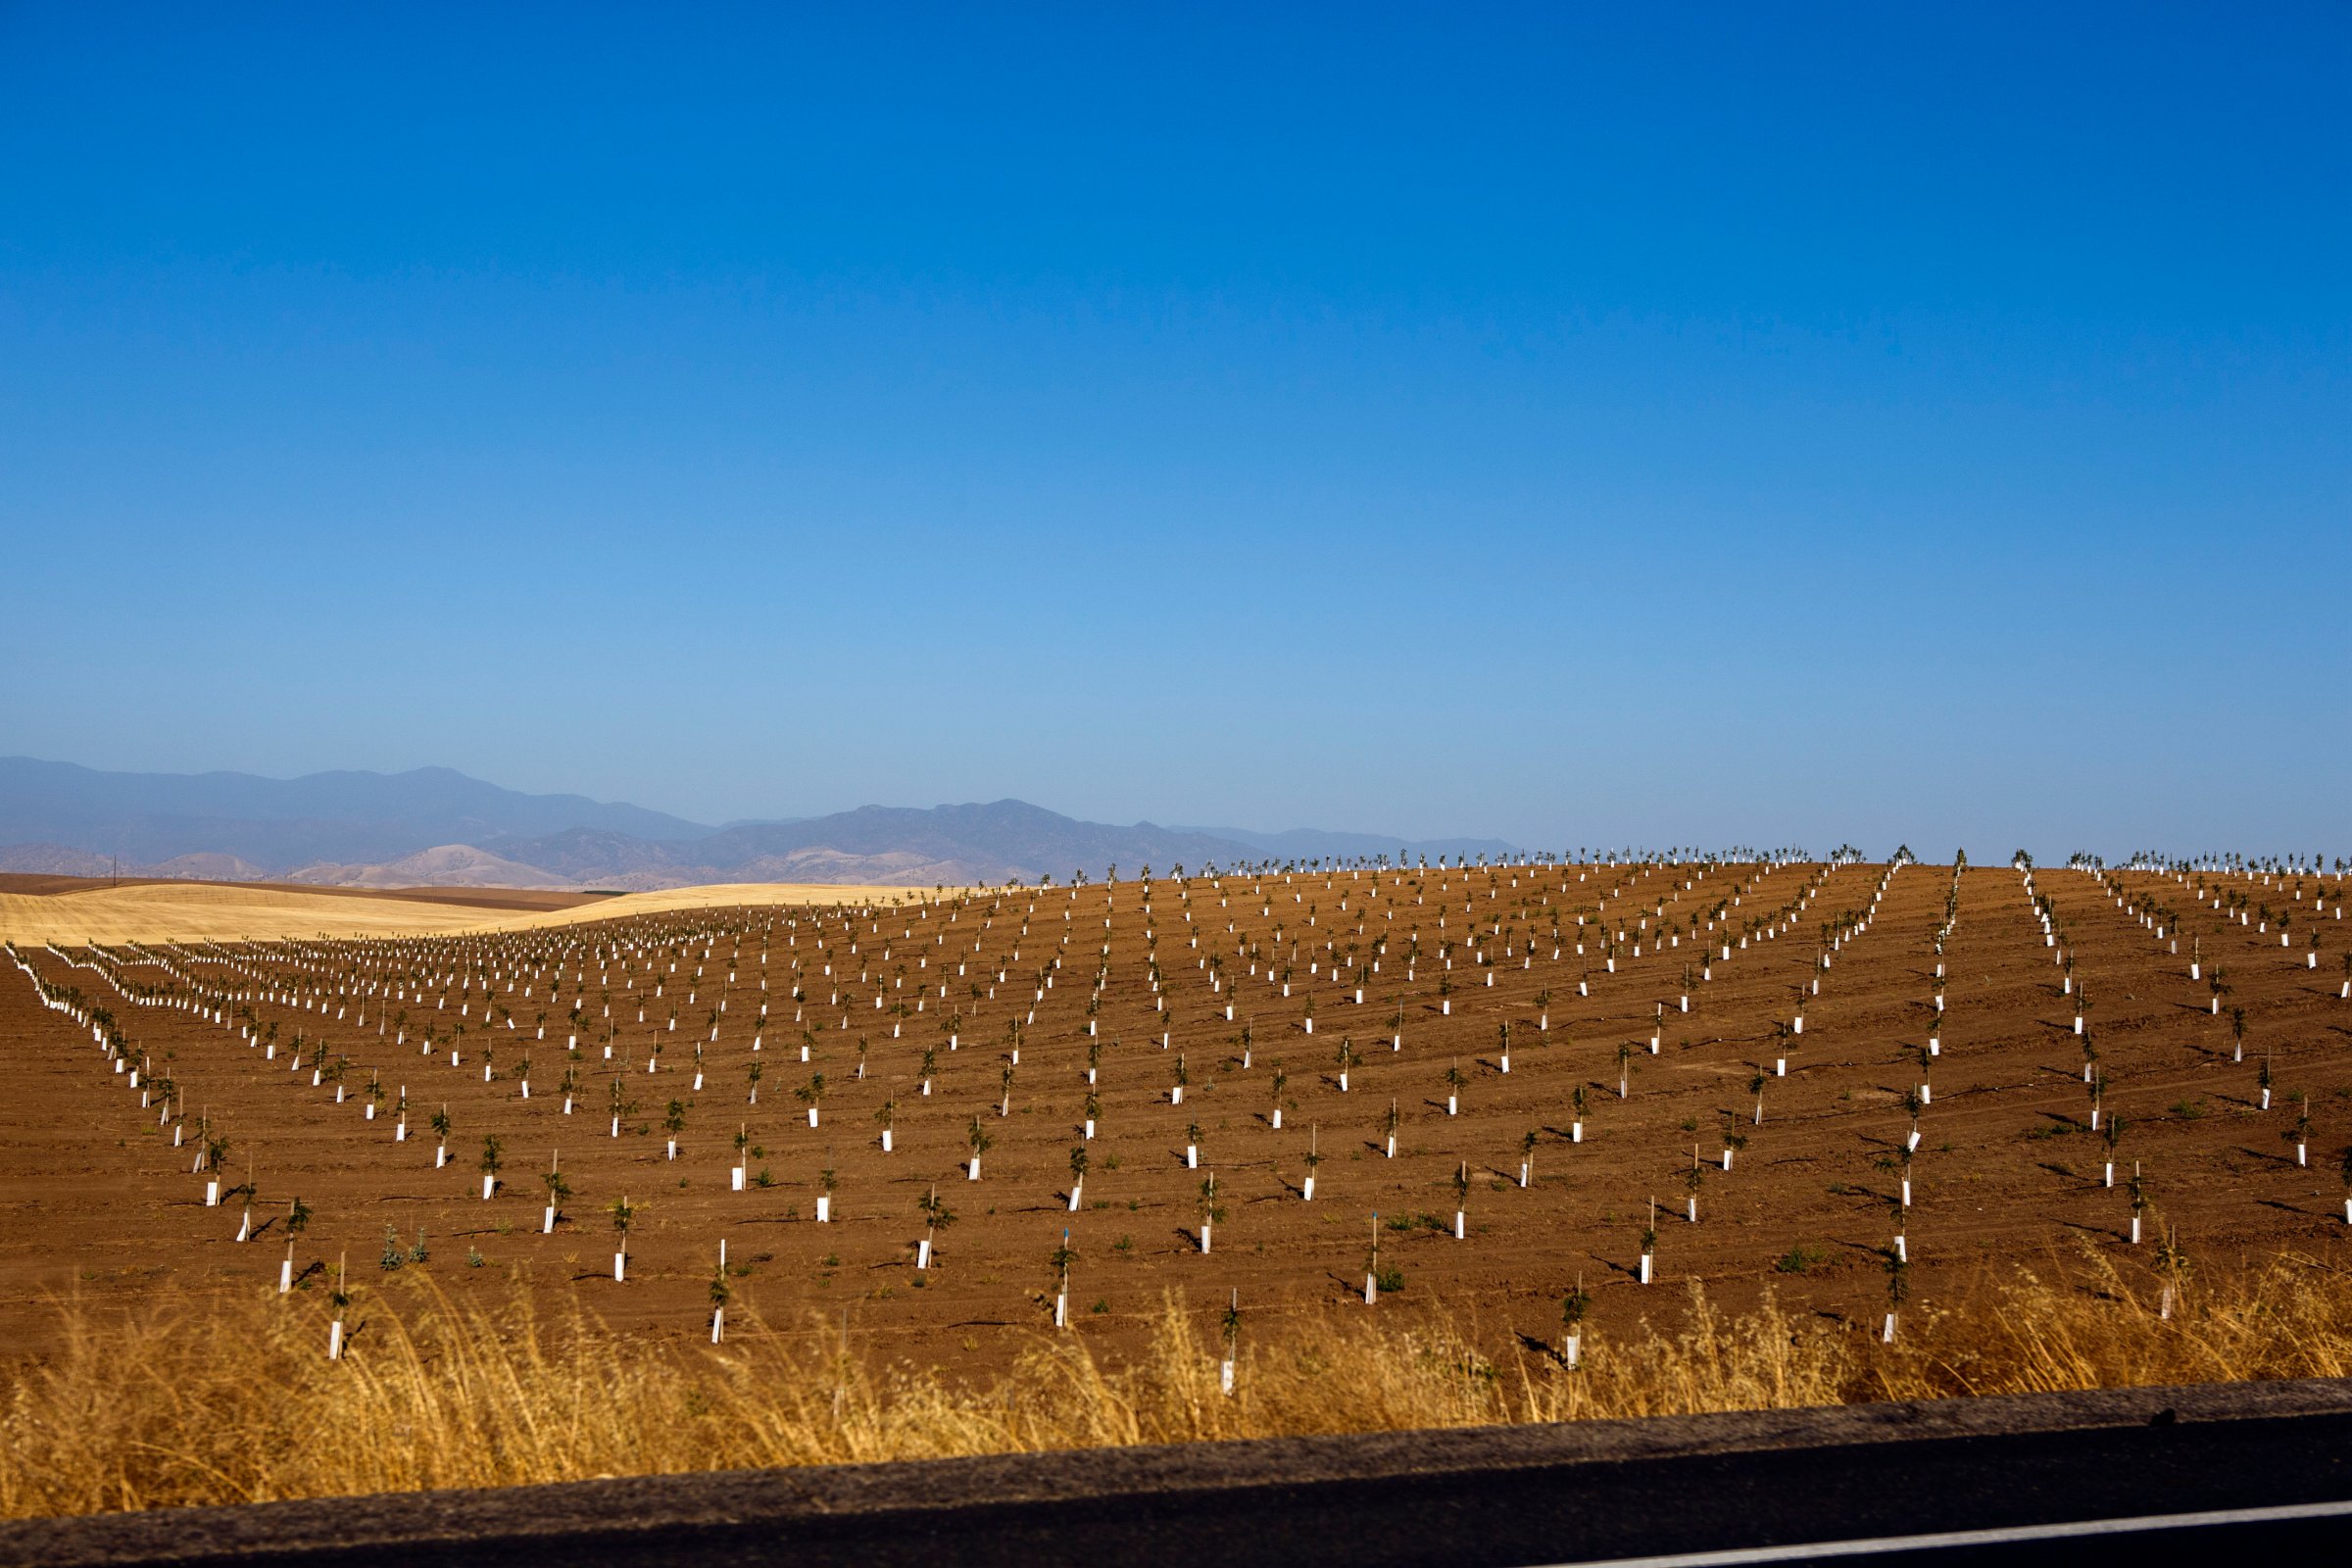 A field of recently planted crops grows off California Highway 65, near Ducor and south of Porterville during the historic California drought on June 24, 2015 near Ducor, Calif. The rural poor depend on groundwater and with farmers digging deep to water their fields, communities relying on groundwater struggle.